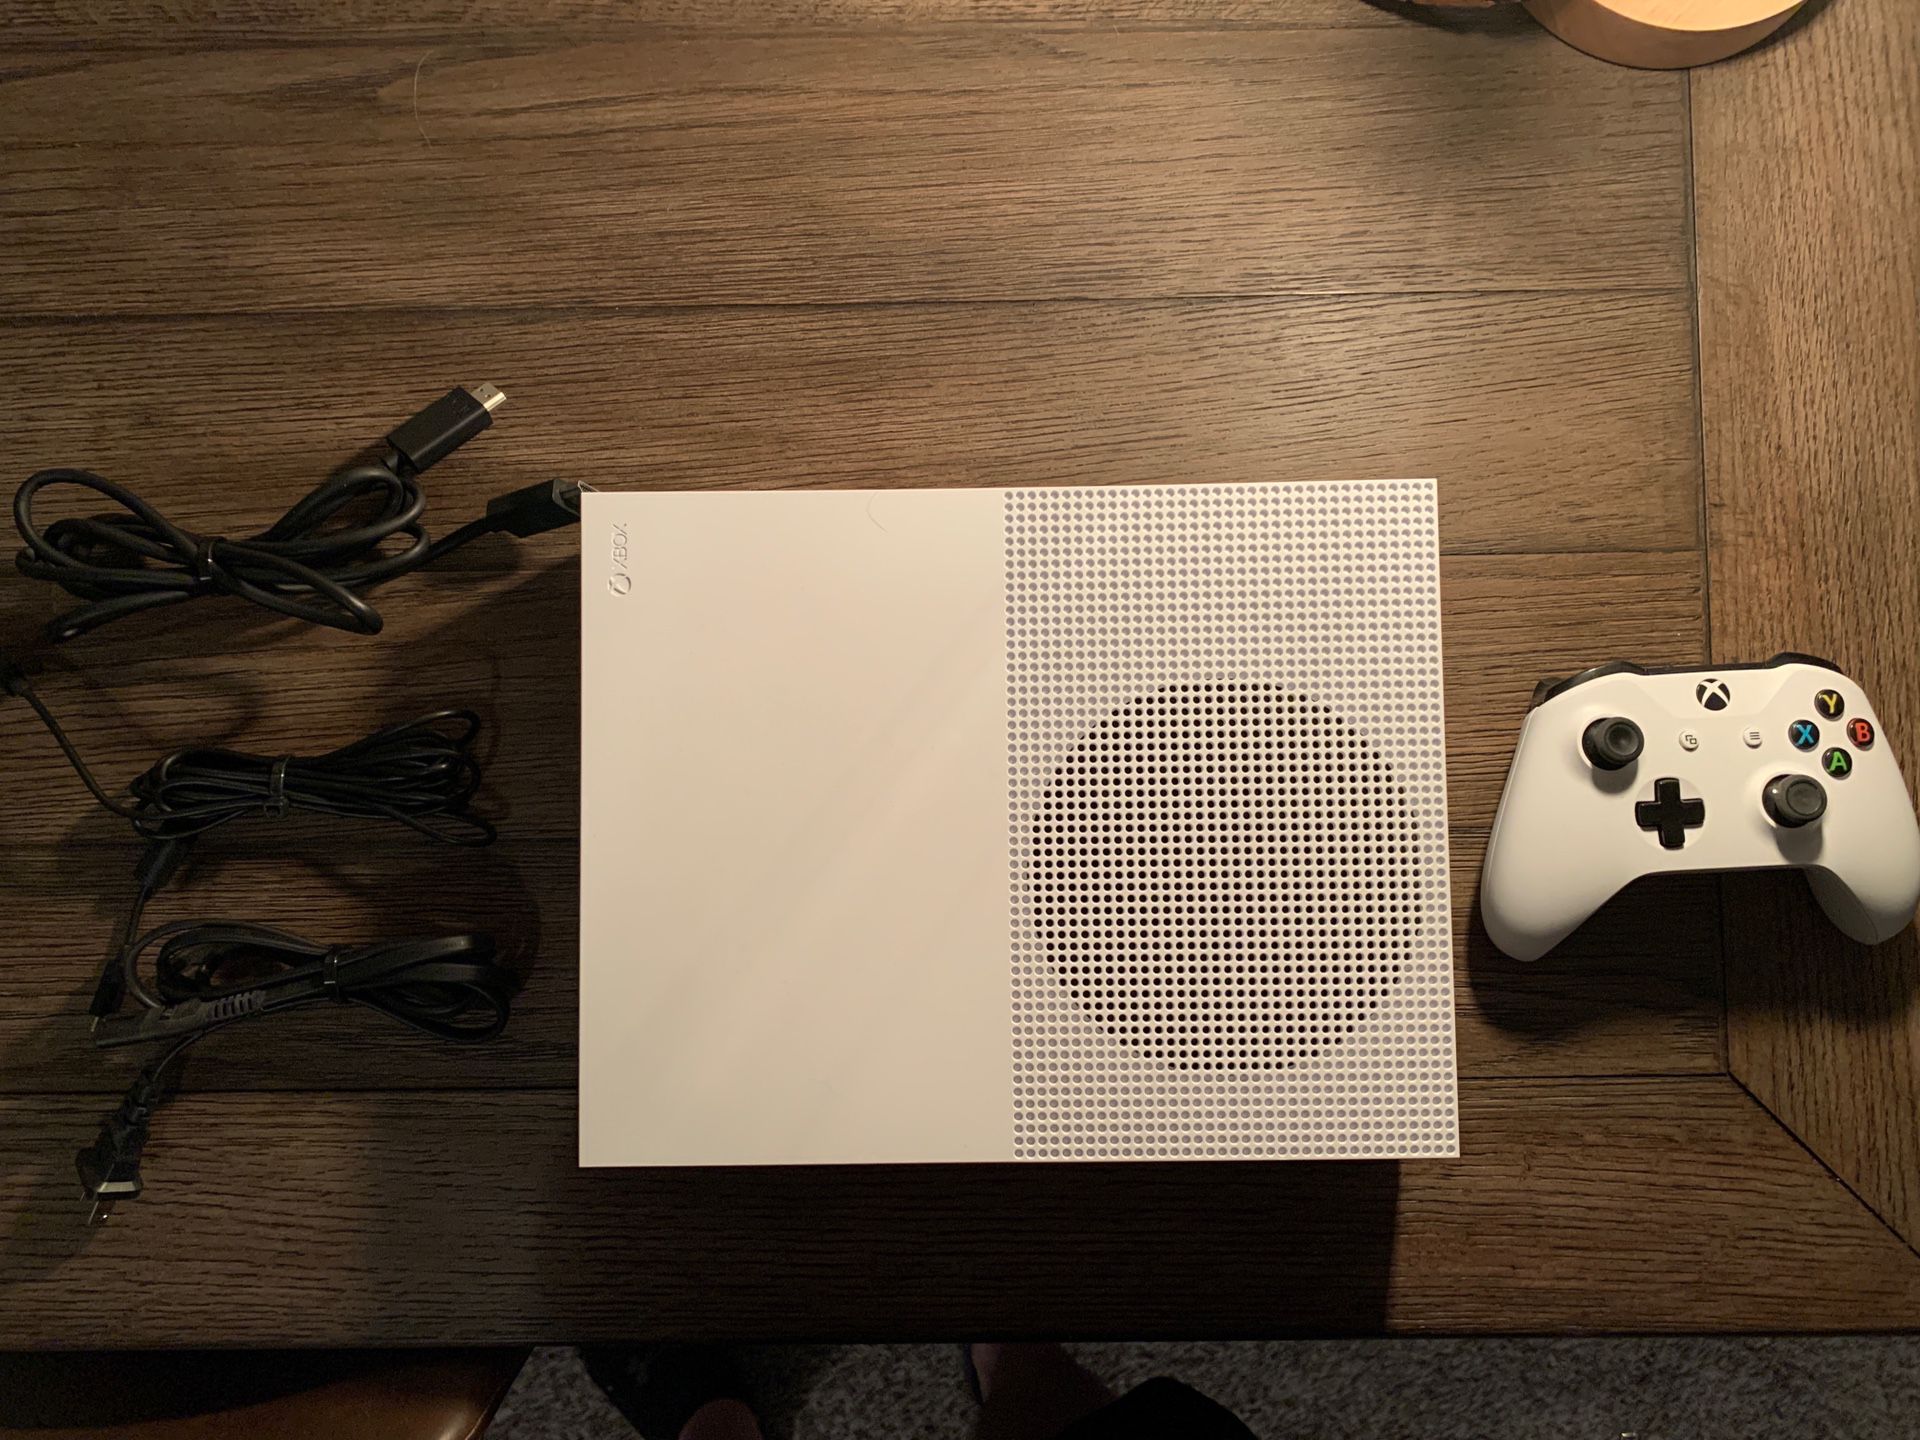 Xbox One S All Digital Edition with controller charger